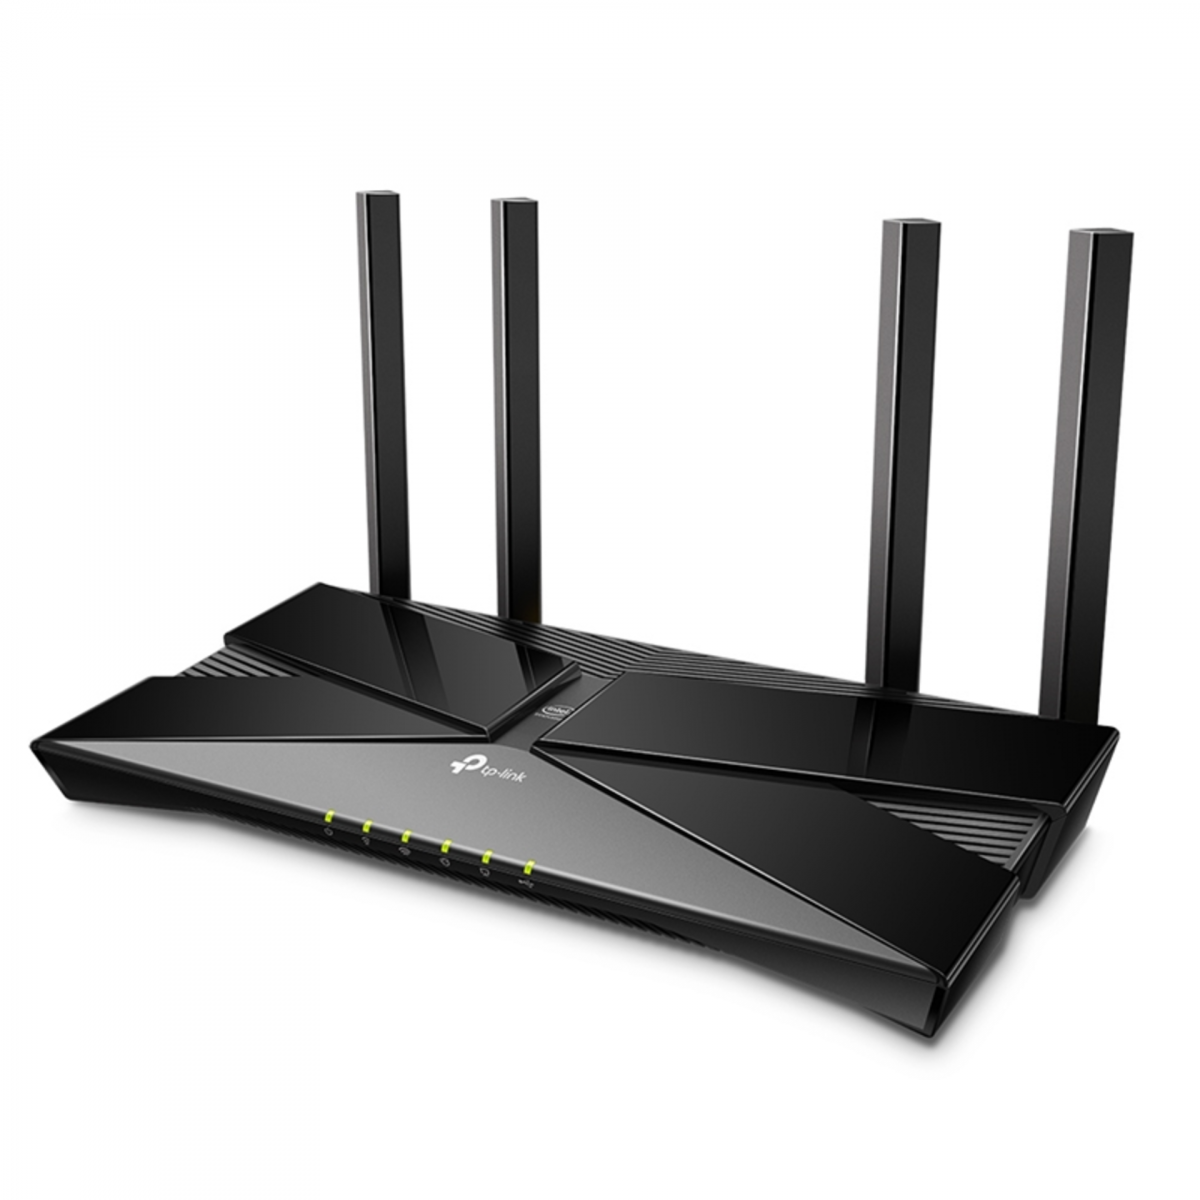 Маршрутизатор / Archer AX50 / AX3000 Dual Band Wireless Gigabit Router,Dual-Core CPU, 1 USB 3.0 Port